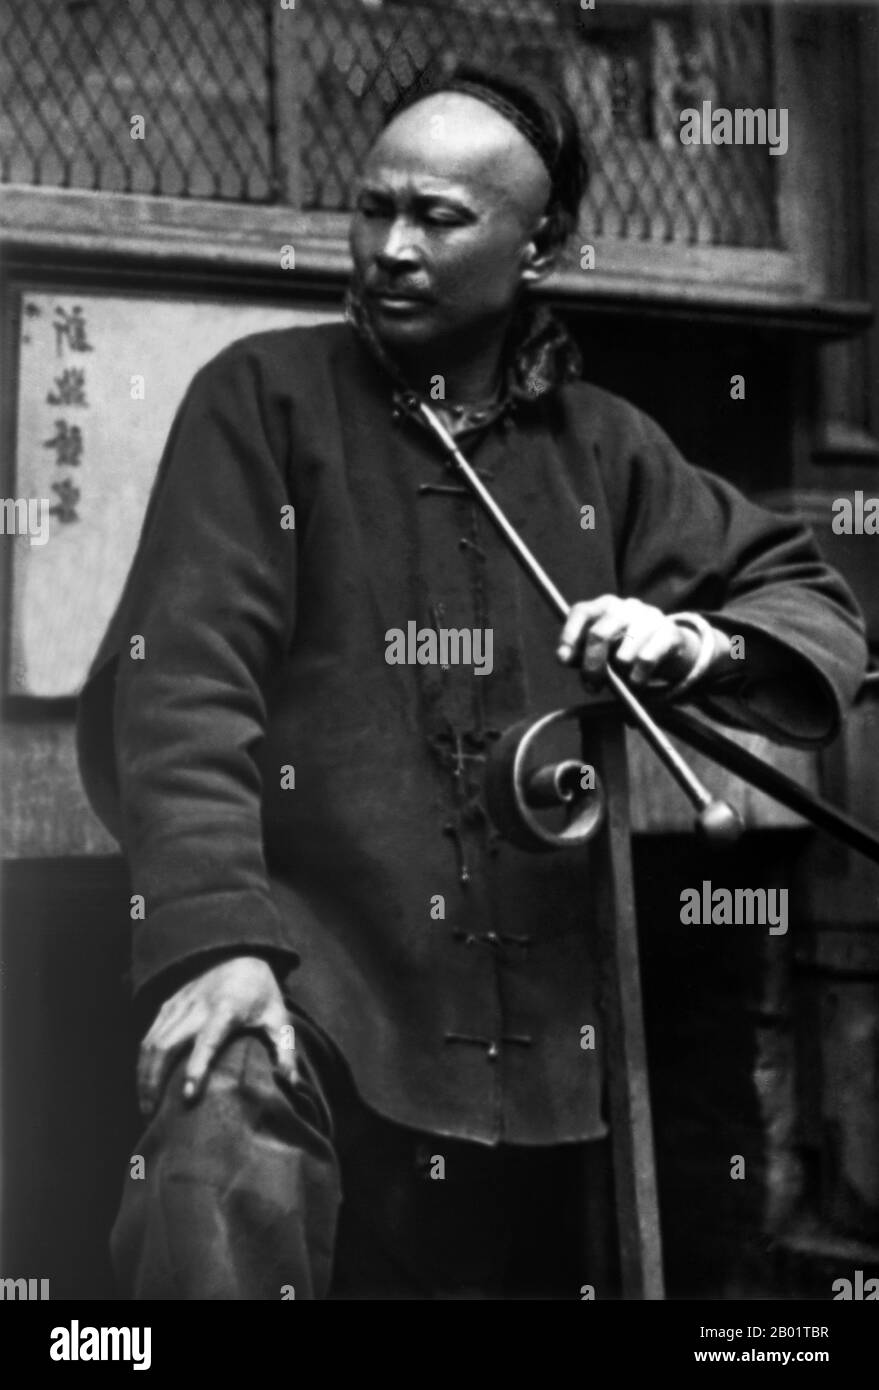 USA: 'The Shoemaker'. San Francisco Chinatown. Photo by Arnold Genthe (1869-1942), c. 1900.  San Francisco's Chinatown was the port of entry for early Hoisanese and Zhongshanese Chinese immigrants from the Guangdong province of southern China from the 1850s to the 1900s. The area was the one geographical region deeded by the city government and private property owners which allowed Chinese persons to inherit and inhabit dwellings within the city.  The majority of these Chinese shopkeepers, restaurant owners and hired workers in San Francisco Chinatown were predominantly Hoisanese and male. Stock Photo